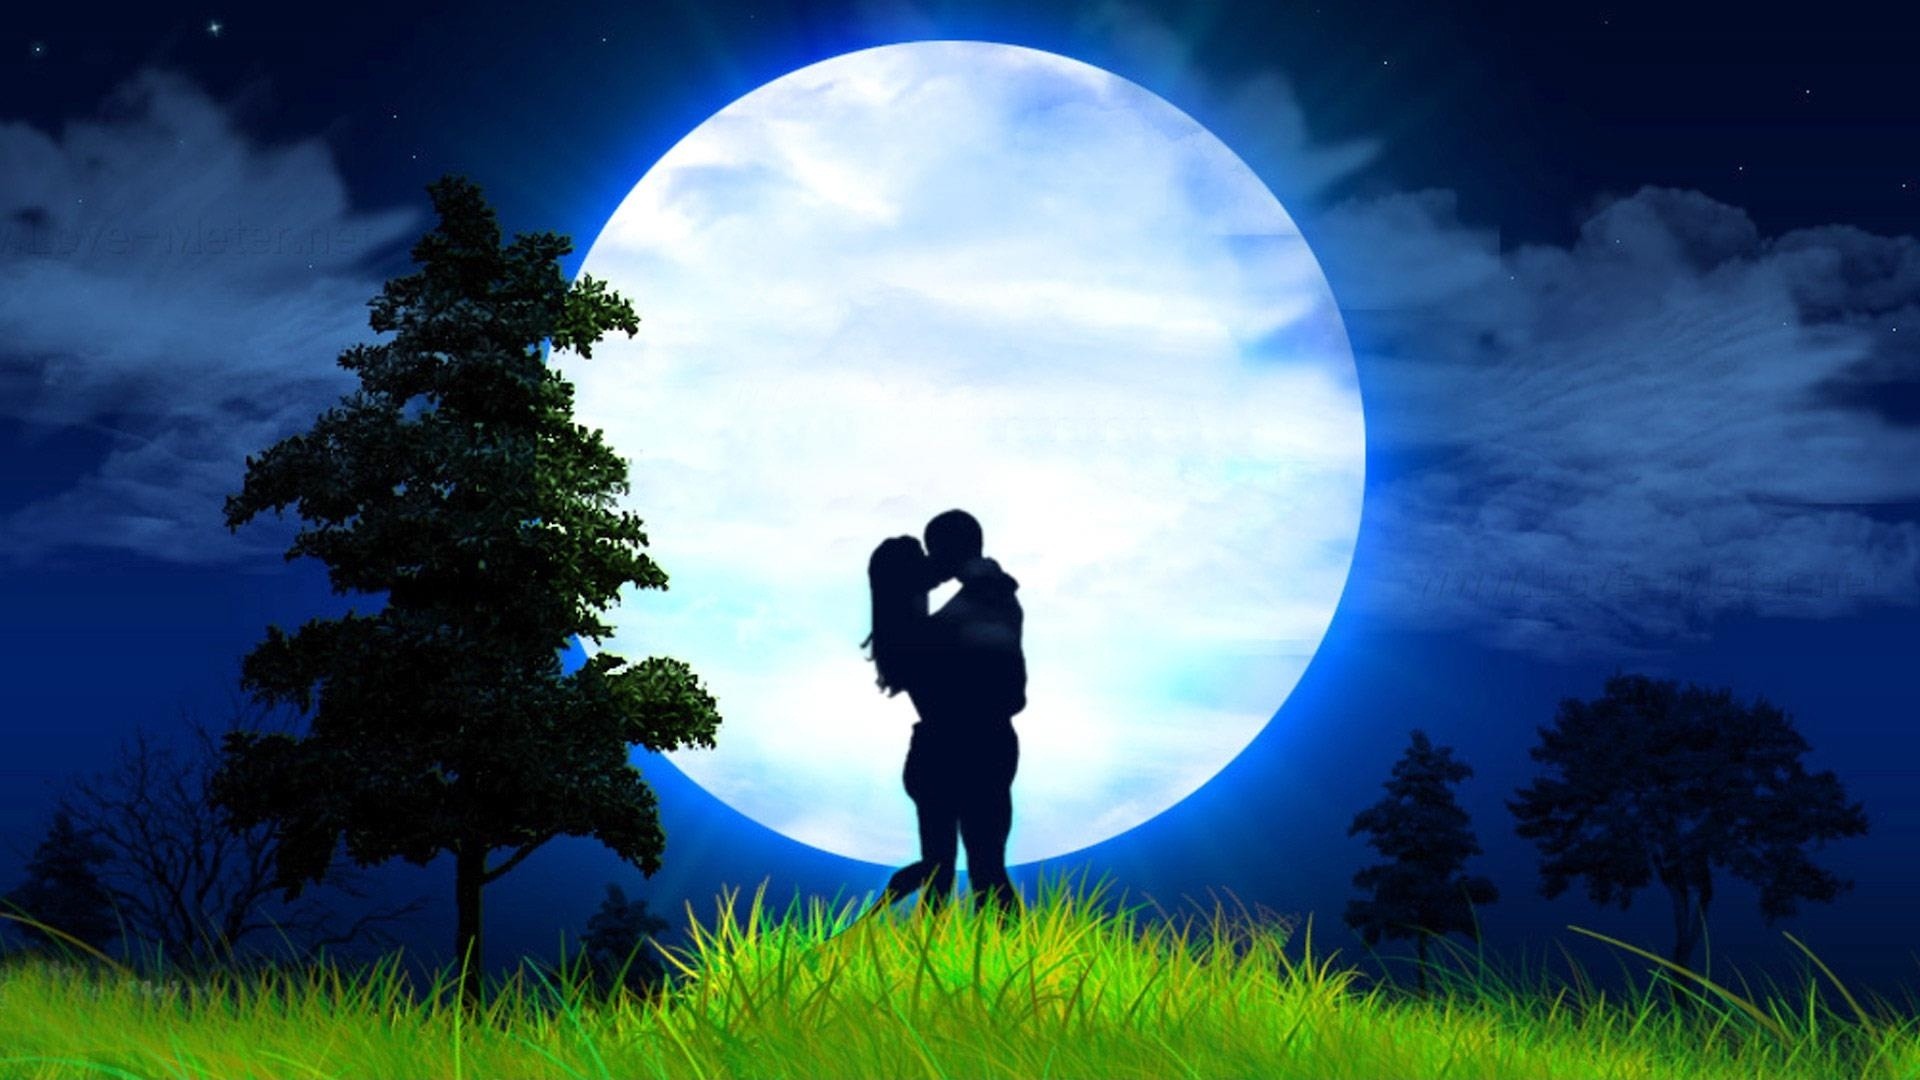 cute good night wallpapers,people in nature,sky,nature,light,moon